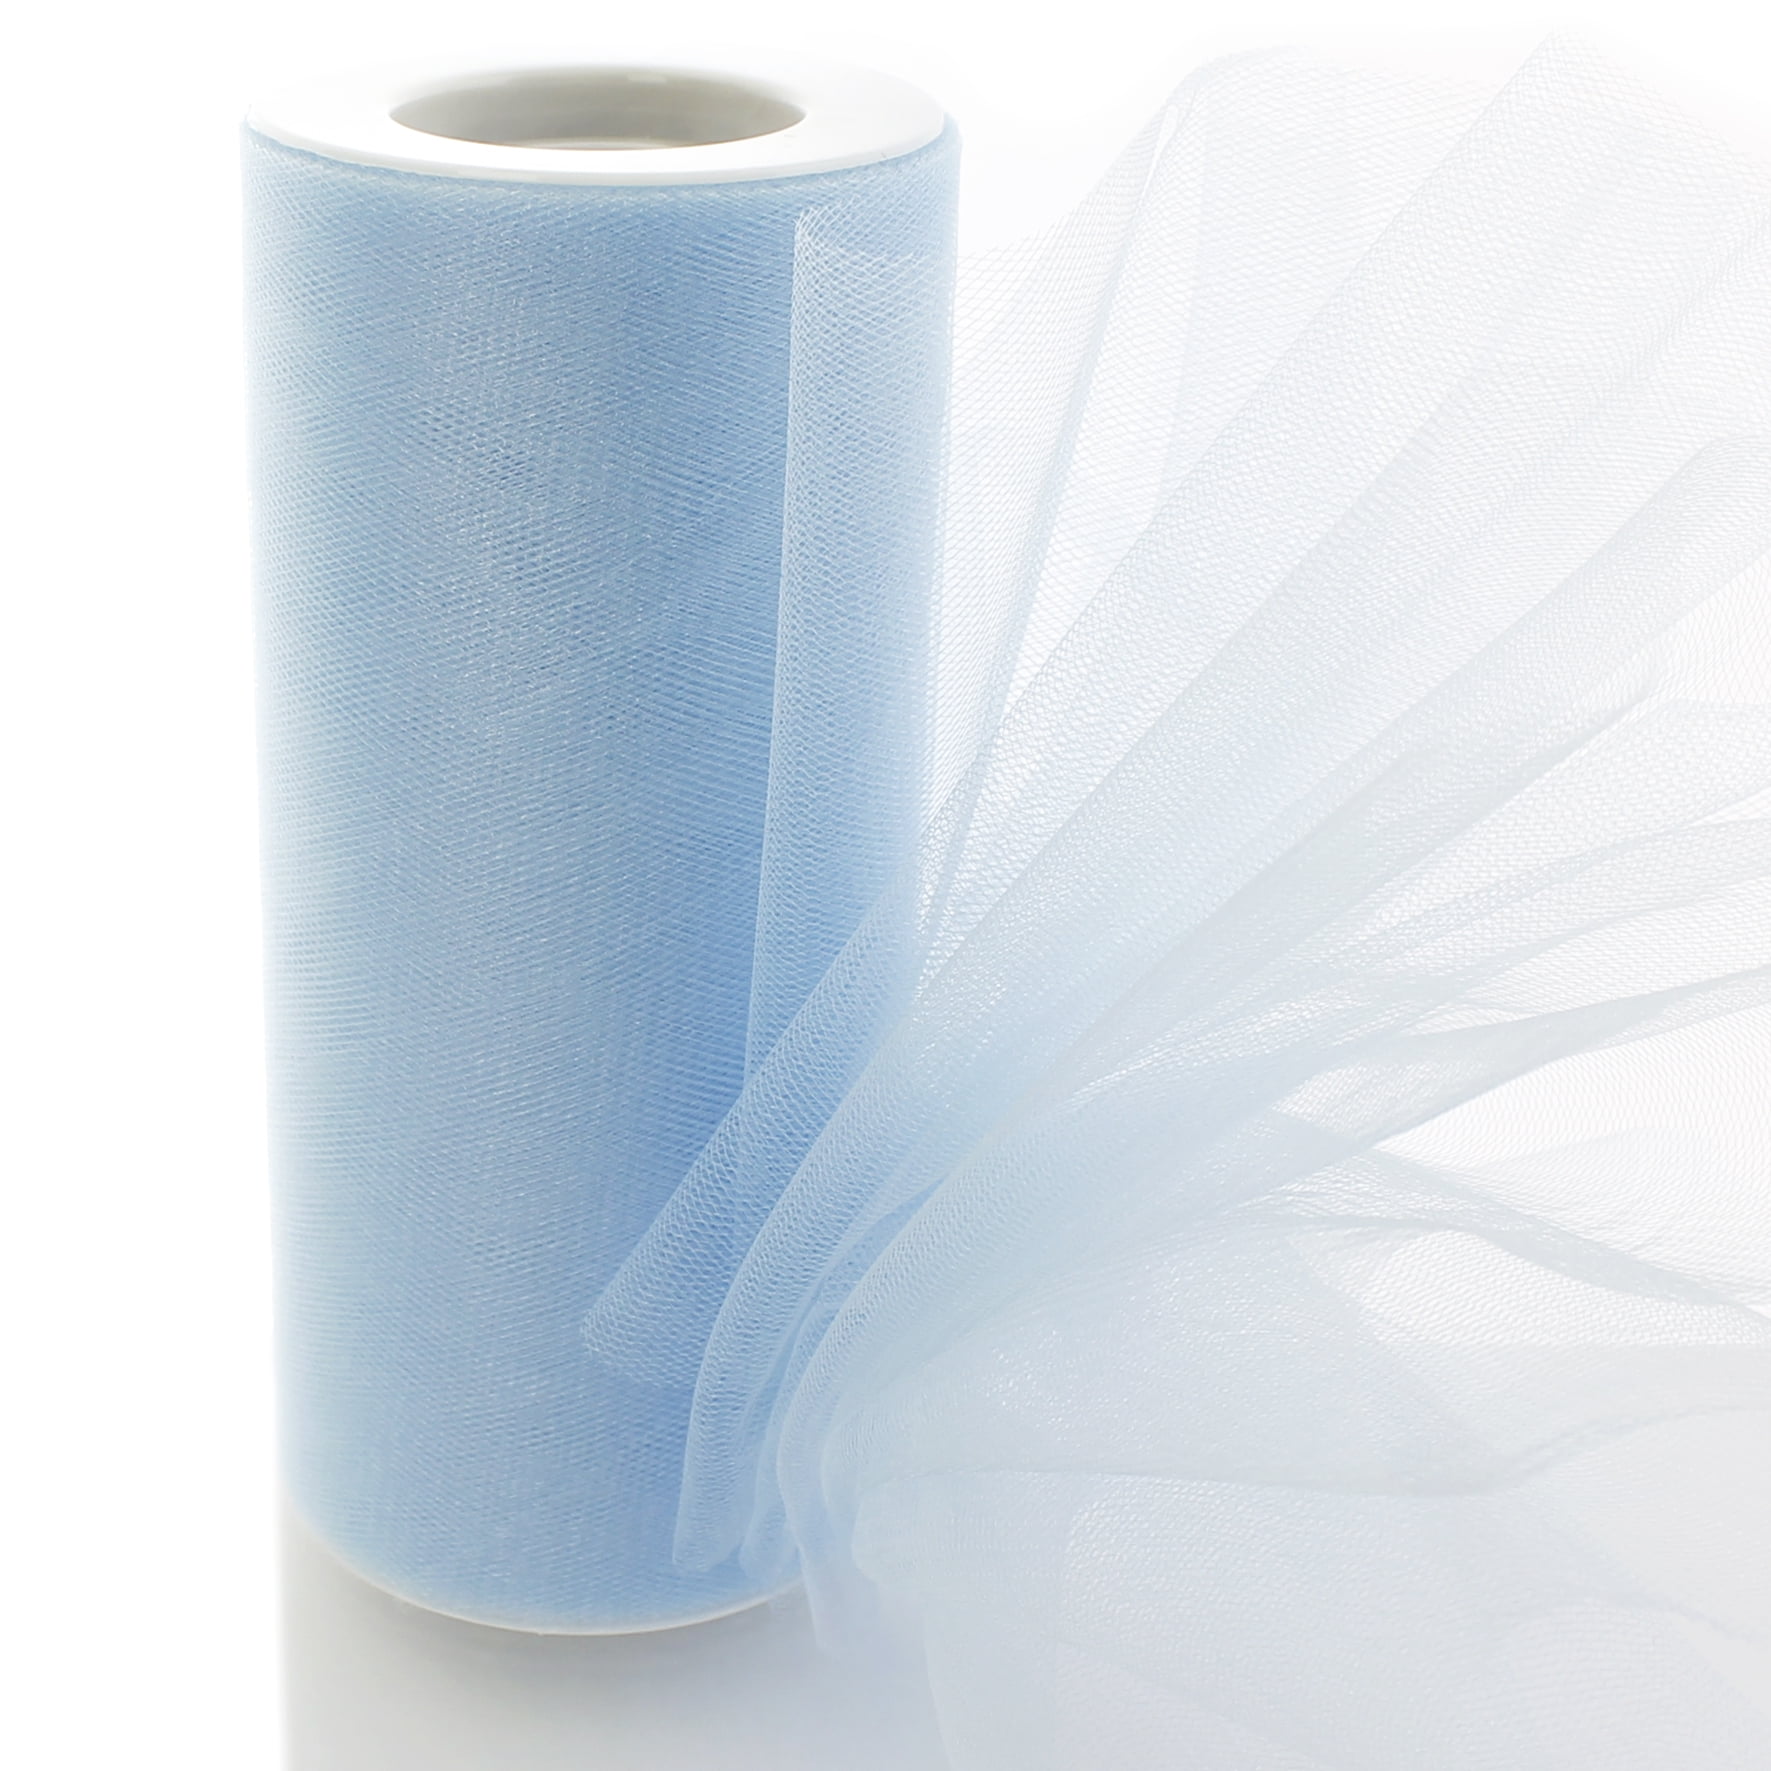 Timgle Tulle Fabric Rolls 54 Inch by 100 Yards (300 Ft) Tulle